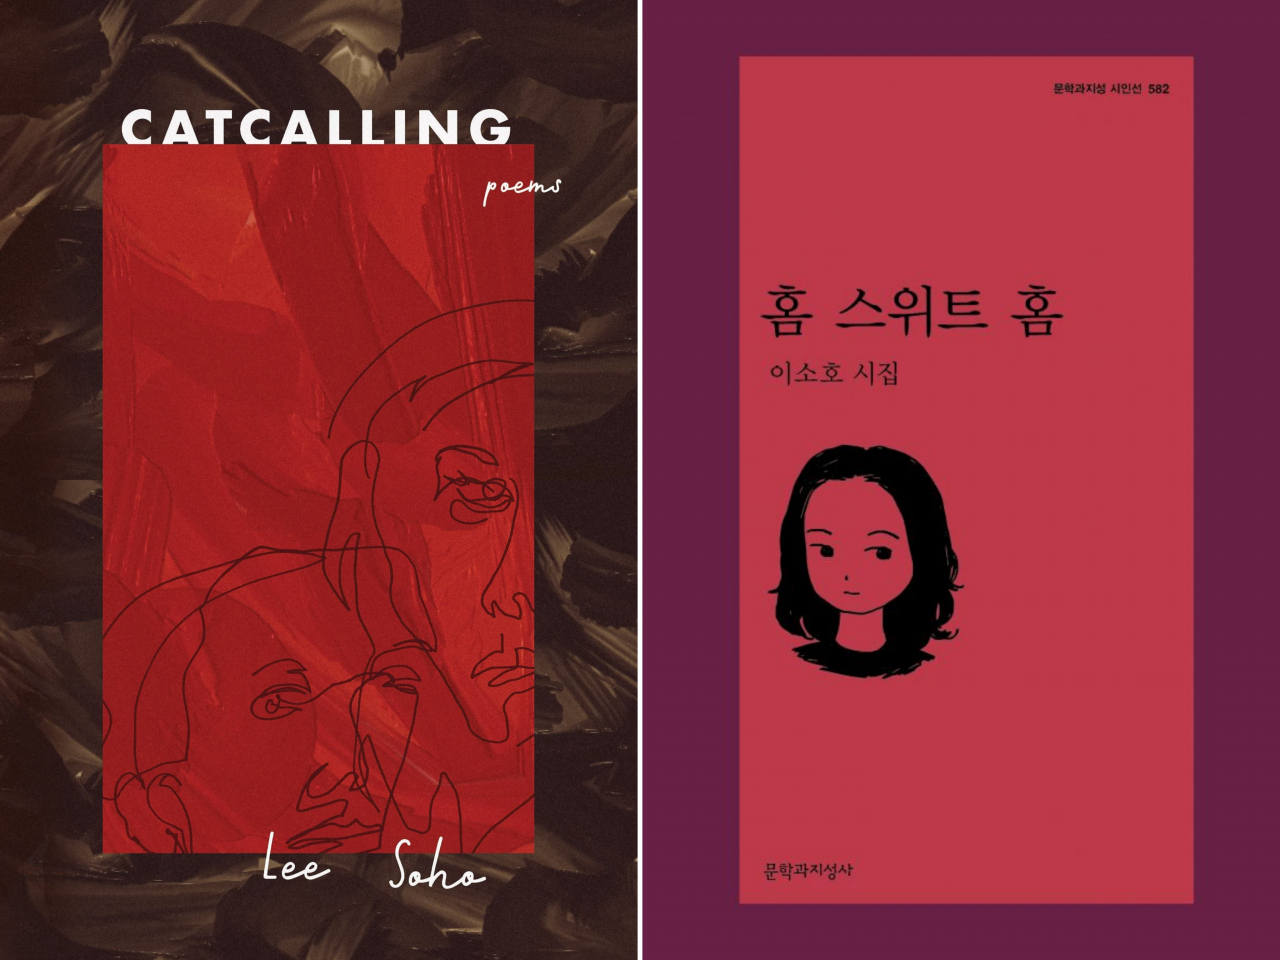 English edition of “Catcalling” (left) and 